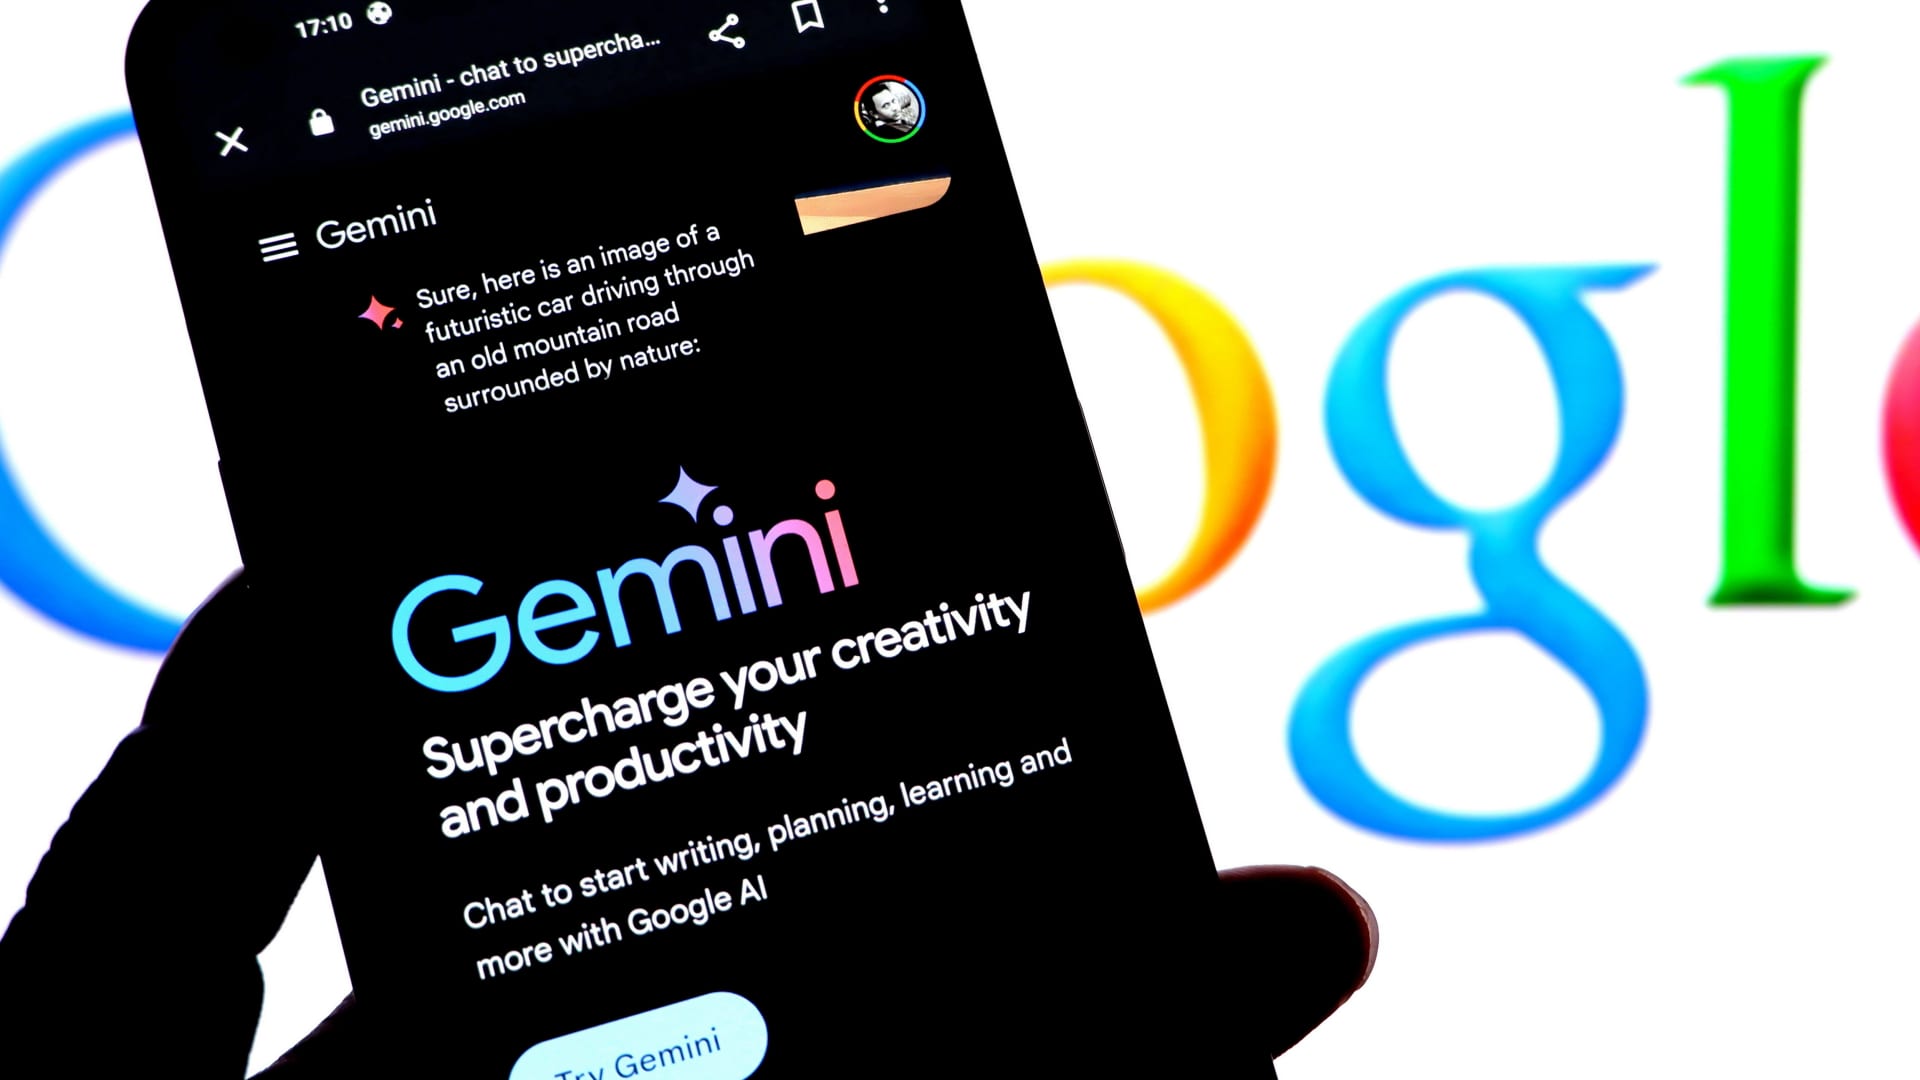 In this photo illustration, a Gemini logo is seen displayed on a smartphone with a Google logo in the background.